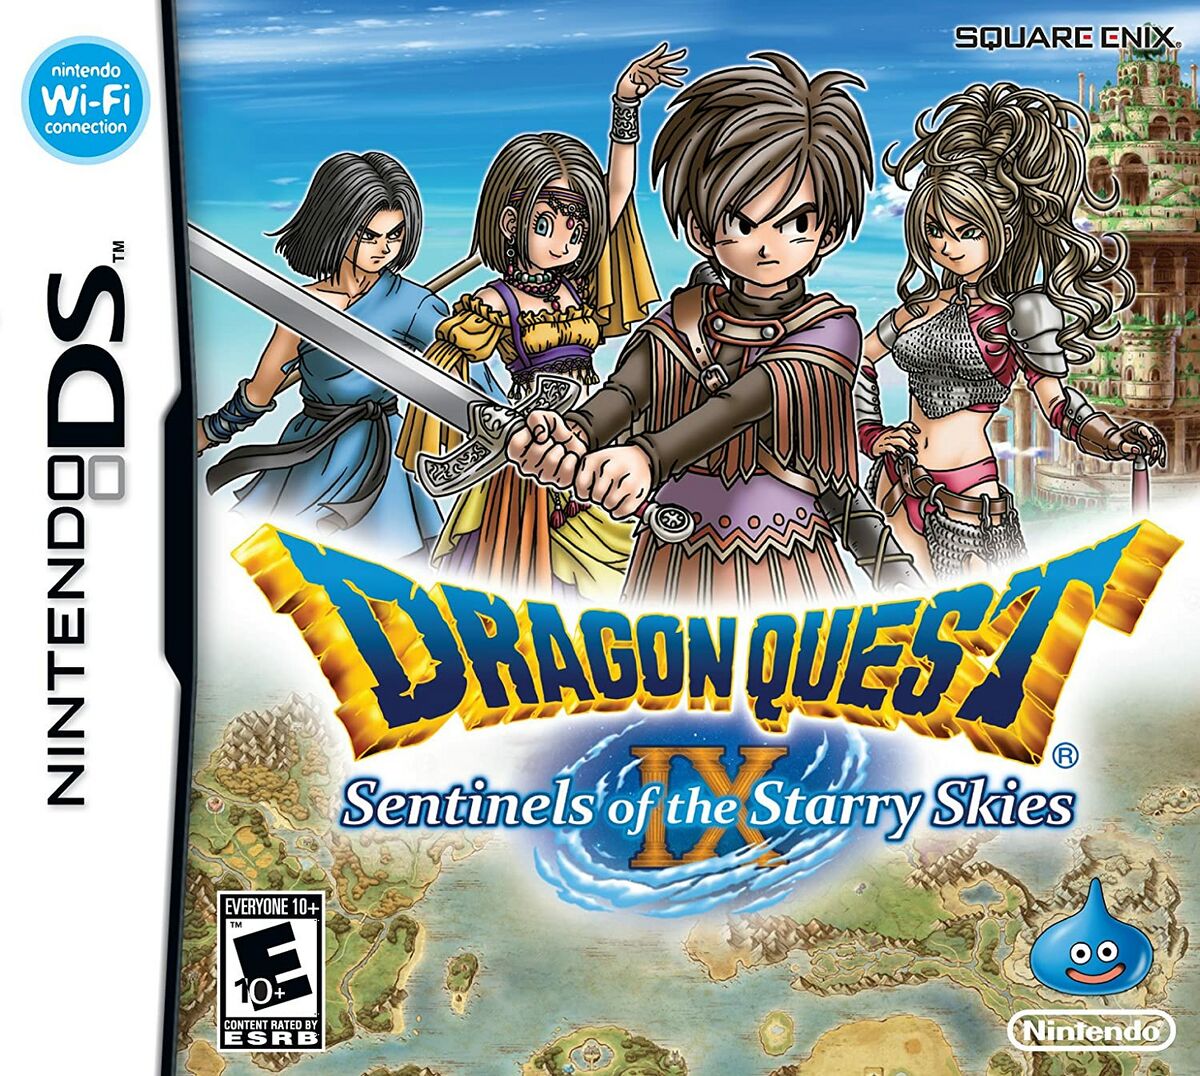 Dragon Quest Ix Sentinels Of The Starry Skies — Strategywiki Strategy Guide And Game